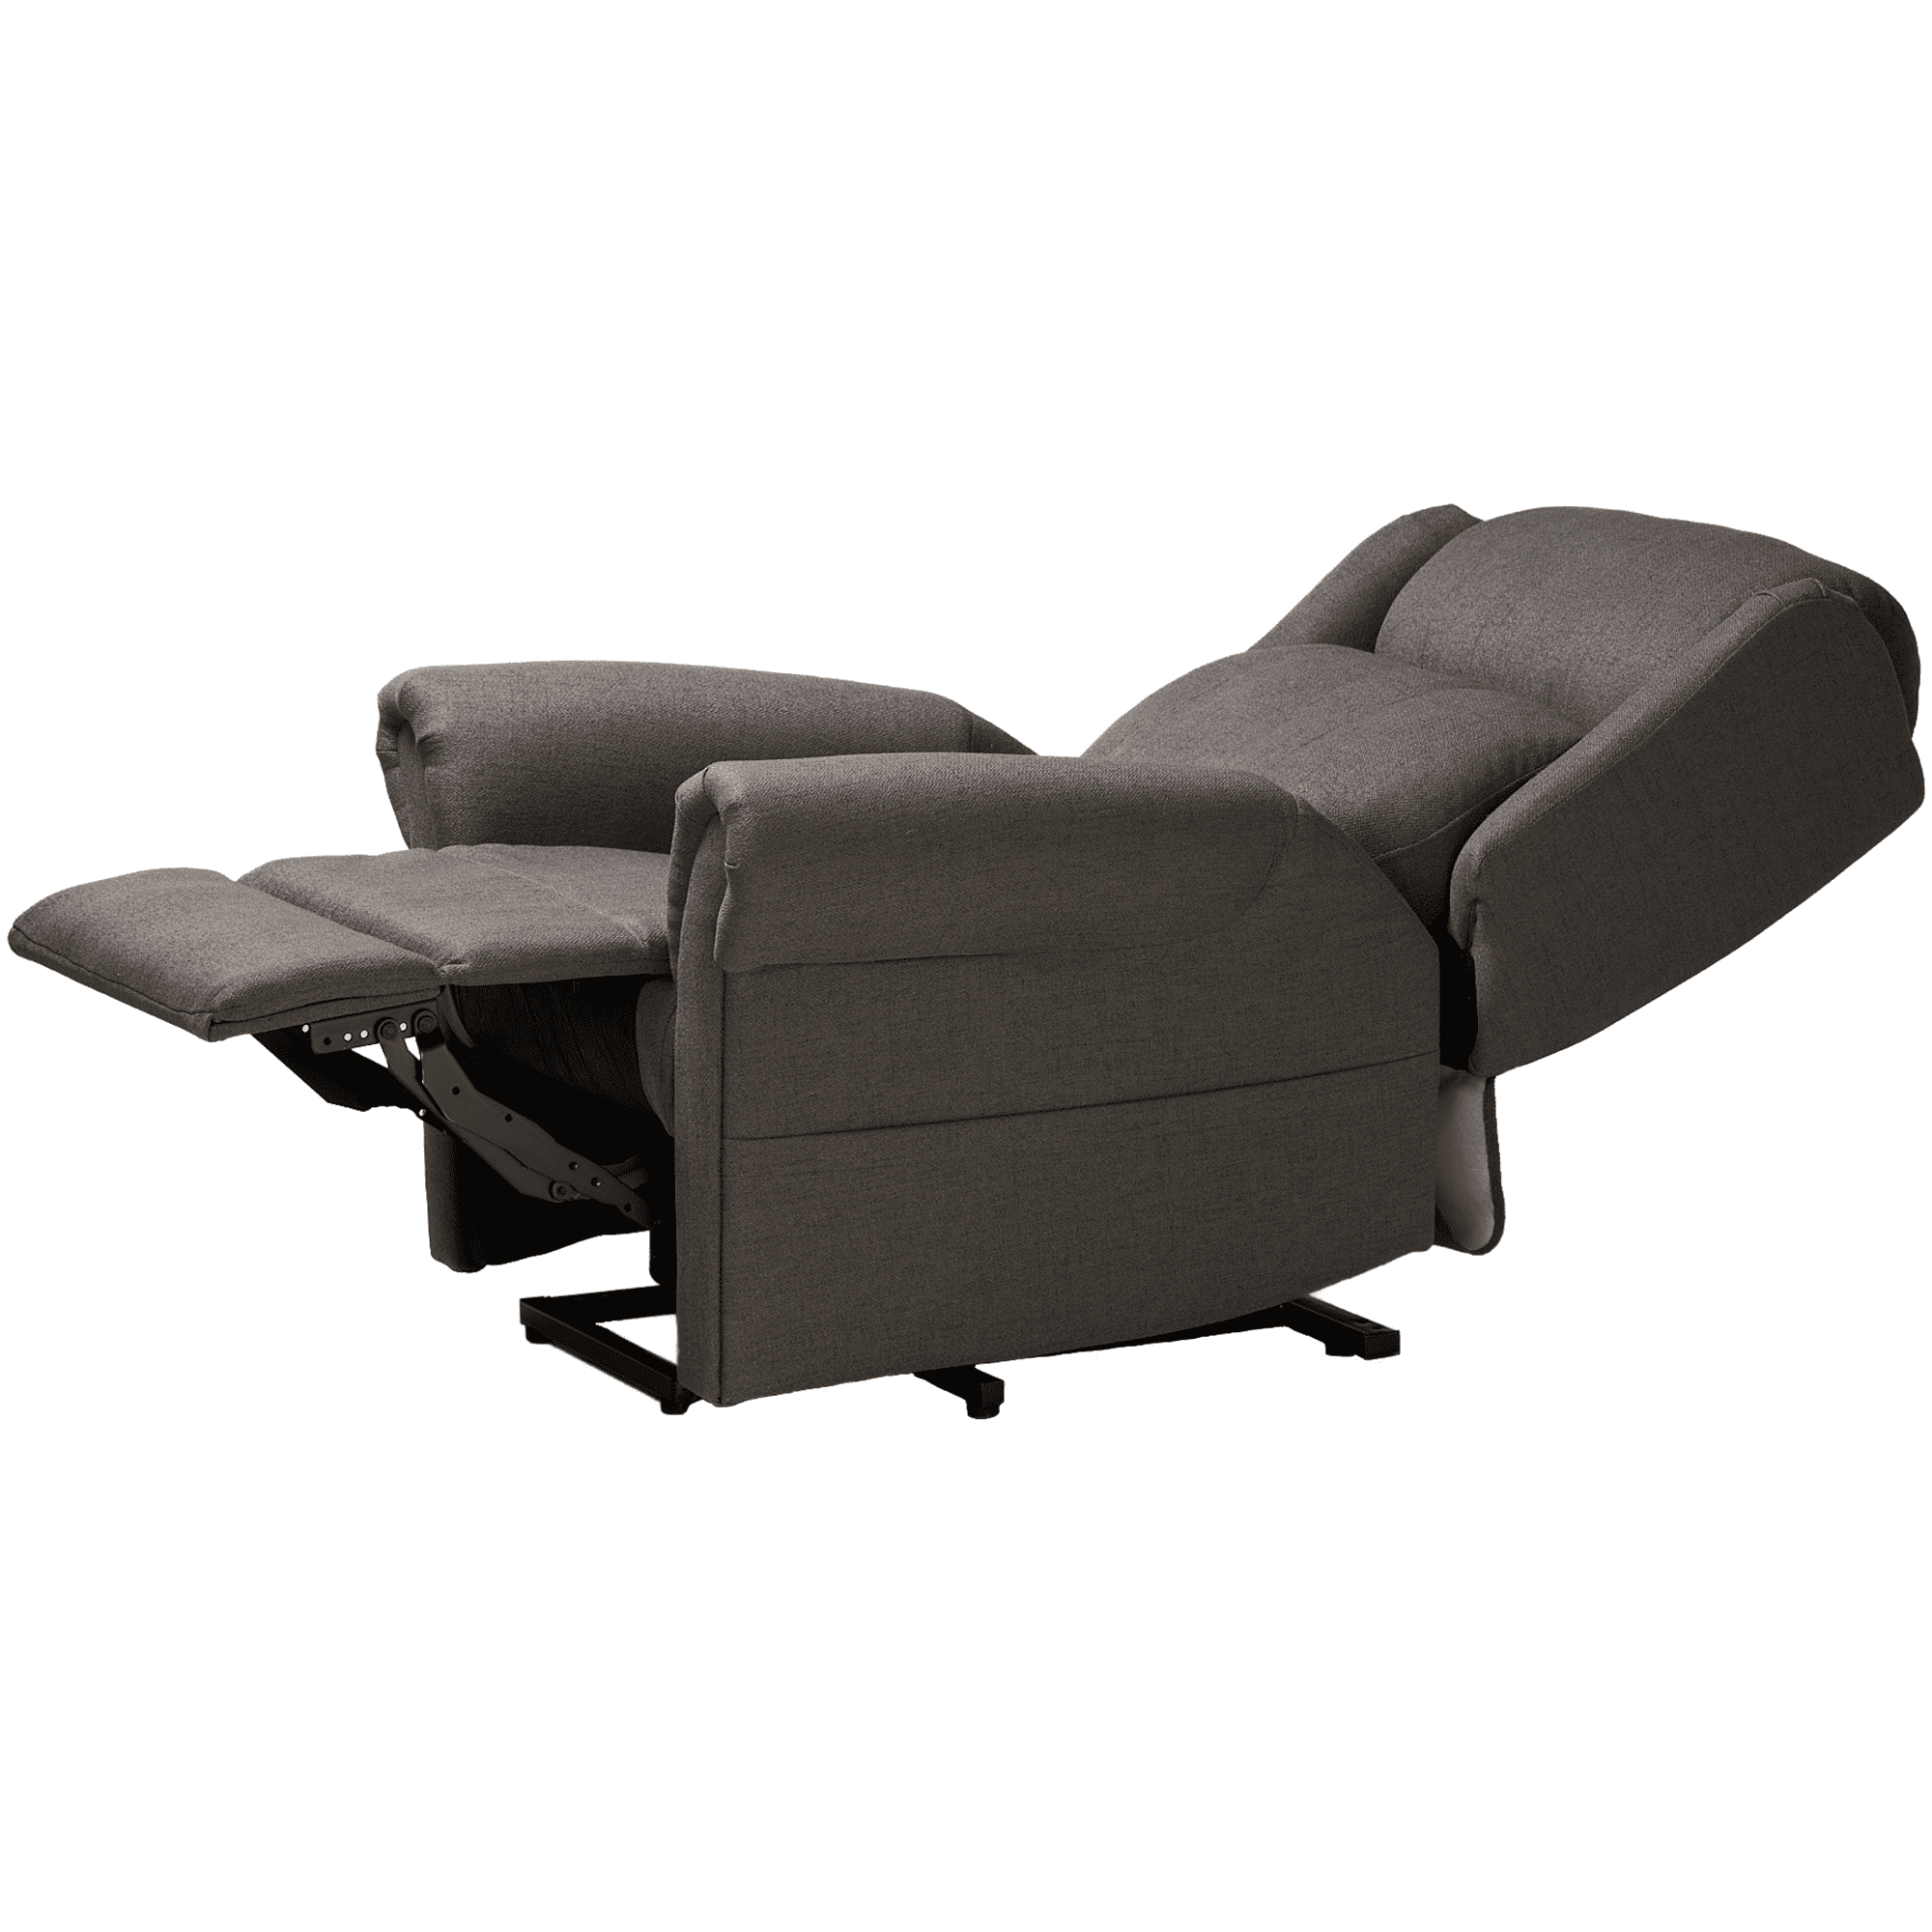 a reclining chair with a foot rest.